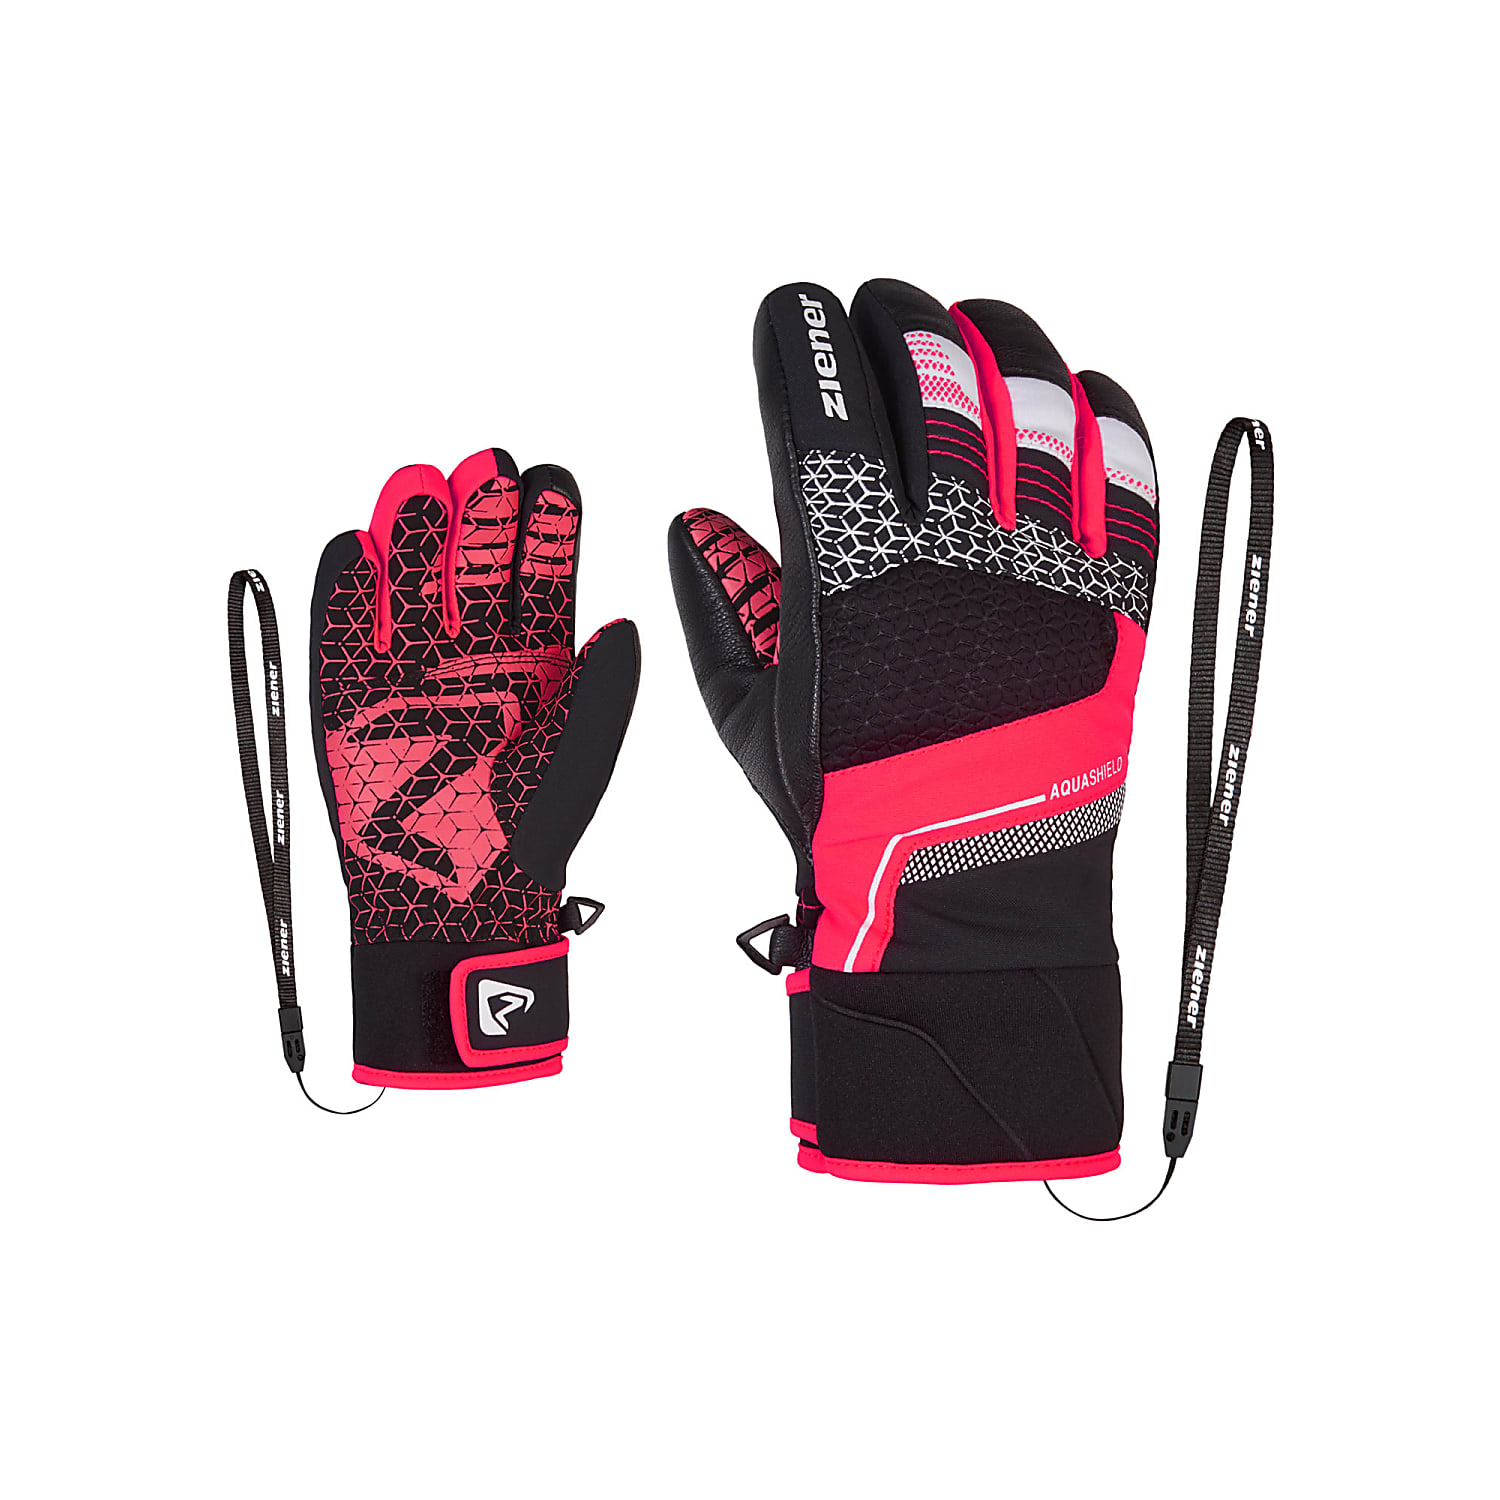 Ziener JUNIOR LONZALO AS shipping Black cheap Pink and GLOVE, - - Neon PR Fast